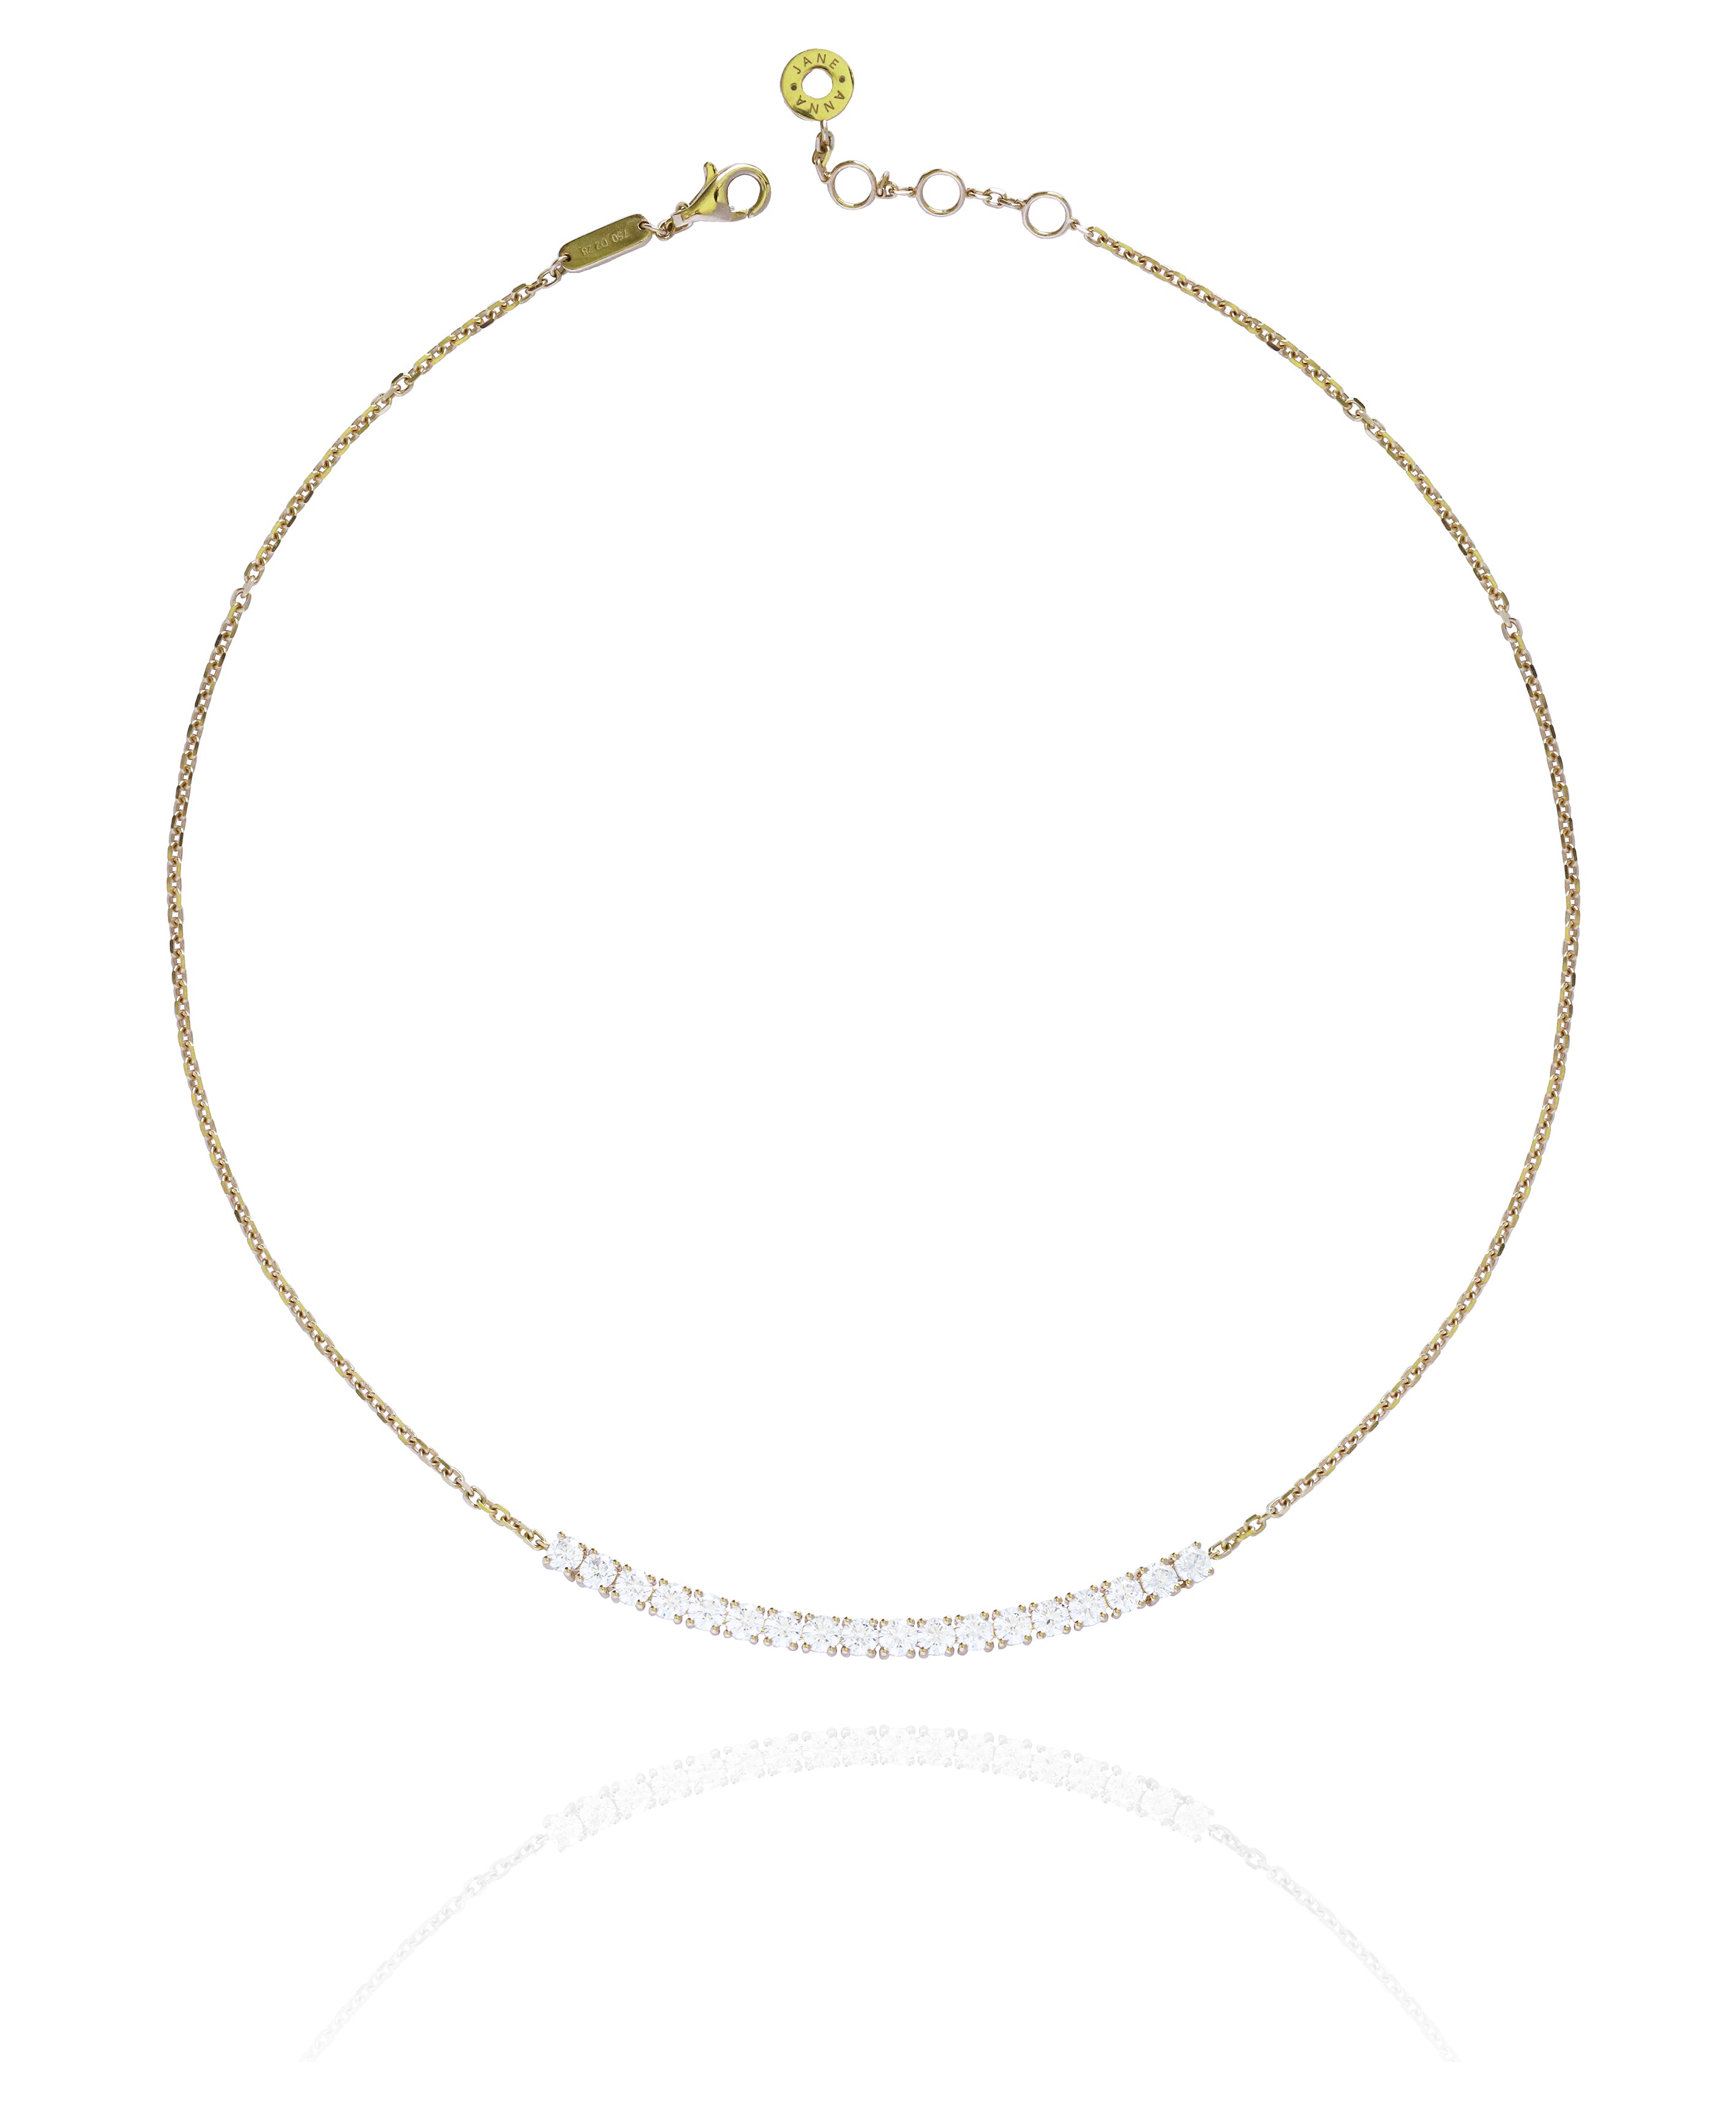 18 Diamonds Choker Necklace in Rose/White/Yellow Gold